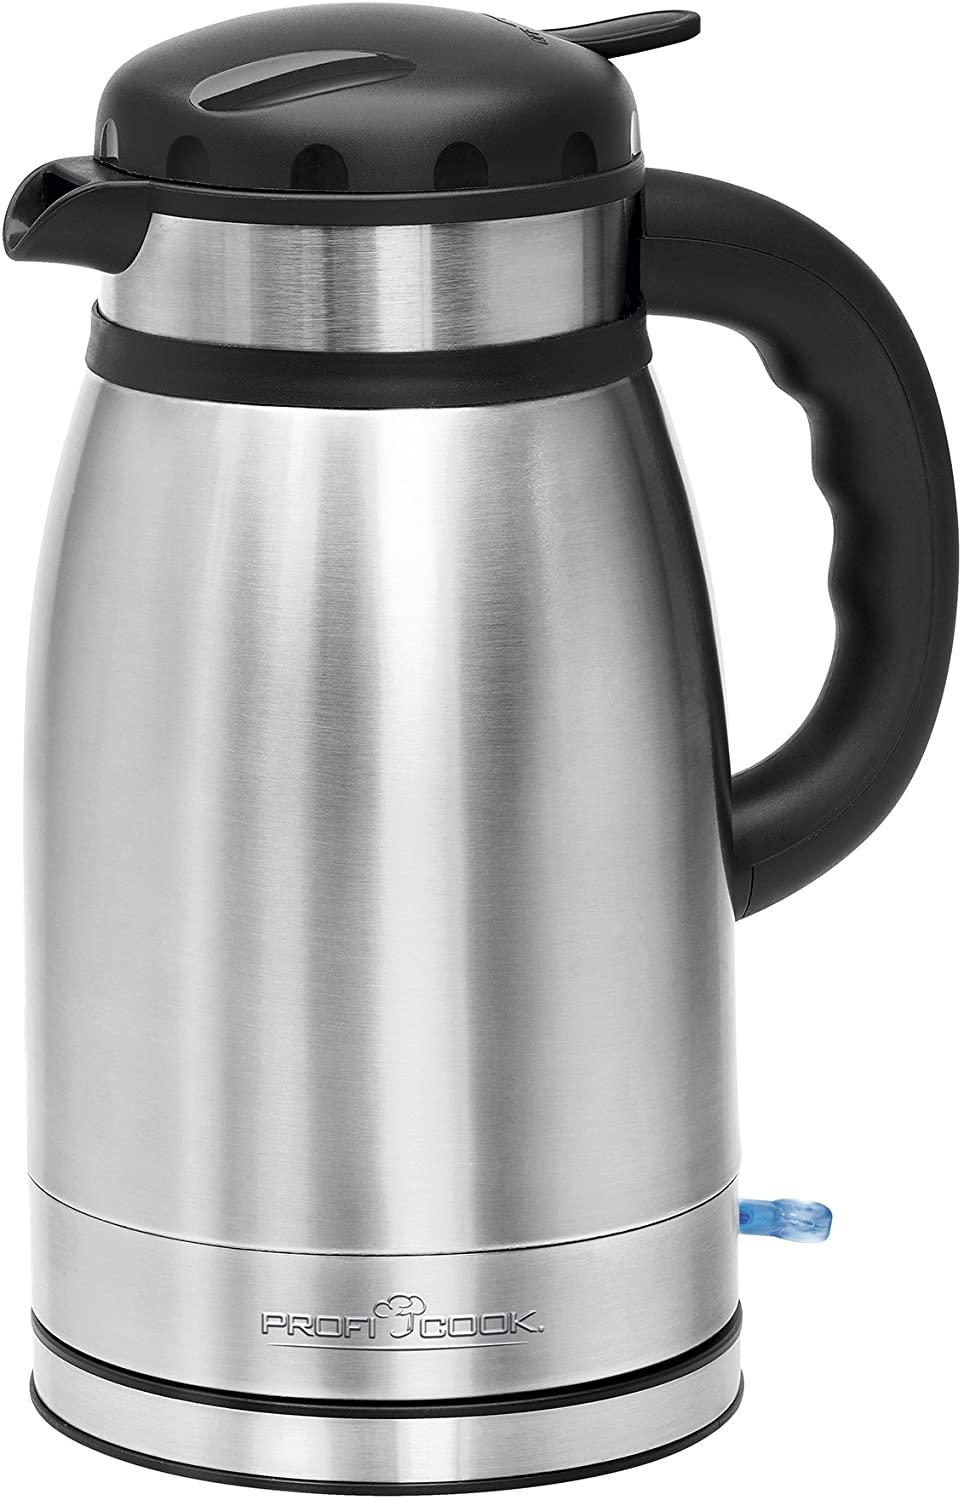 Profi Cook ProfiCook PC-WKS 1148 T 2-in-1 Stainless Steel Kettle and Thermos Jug, 1.5 L, Double-Walled Thermal Housing, Hot Water for Hours